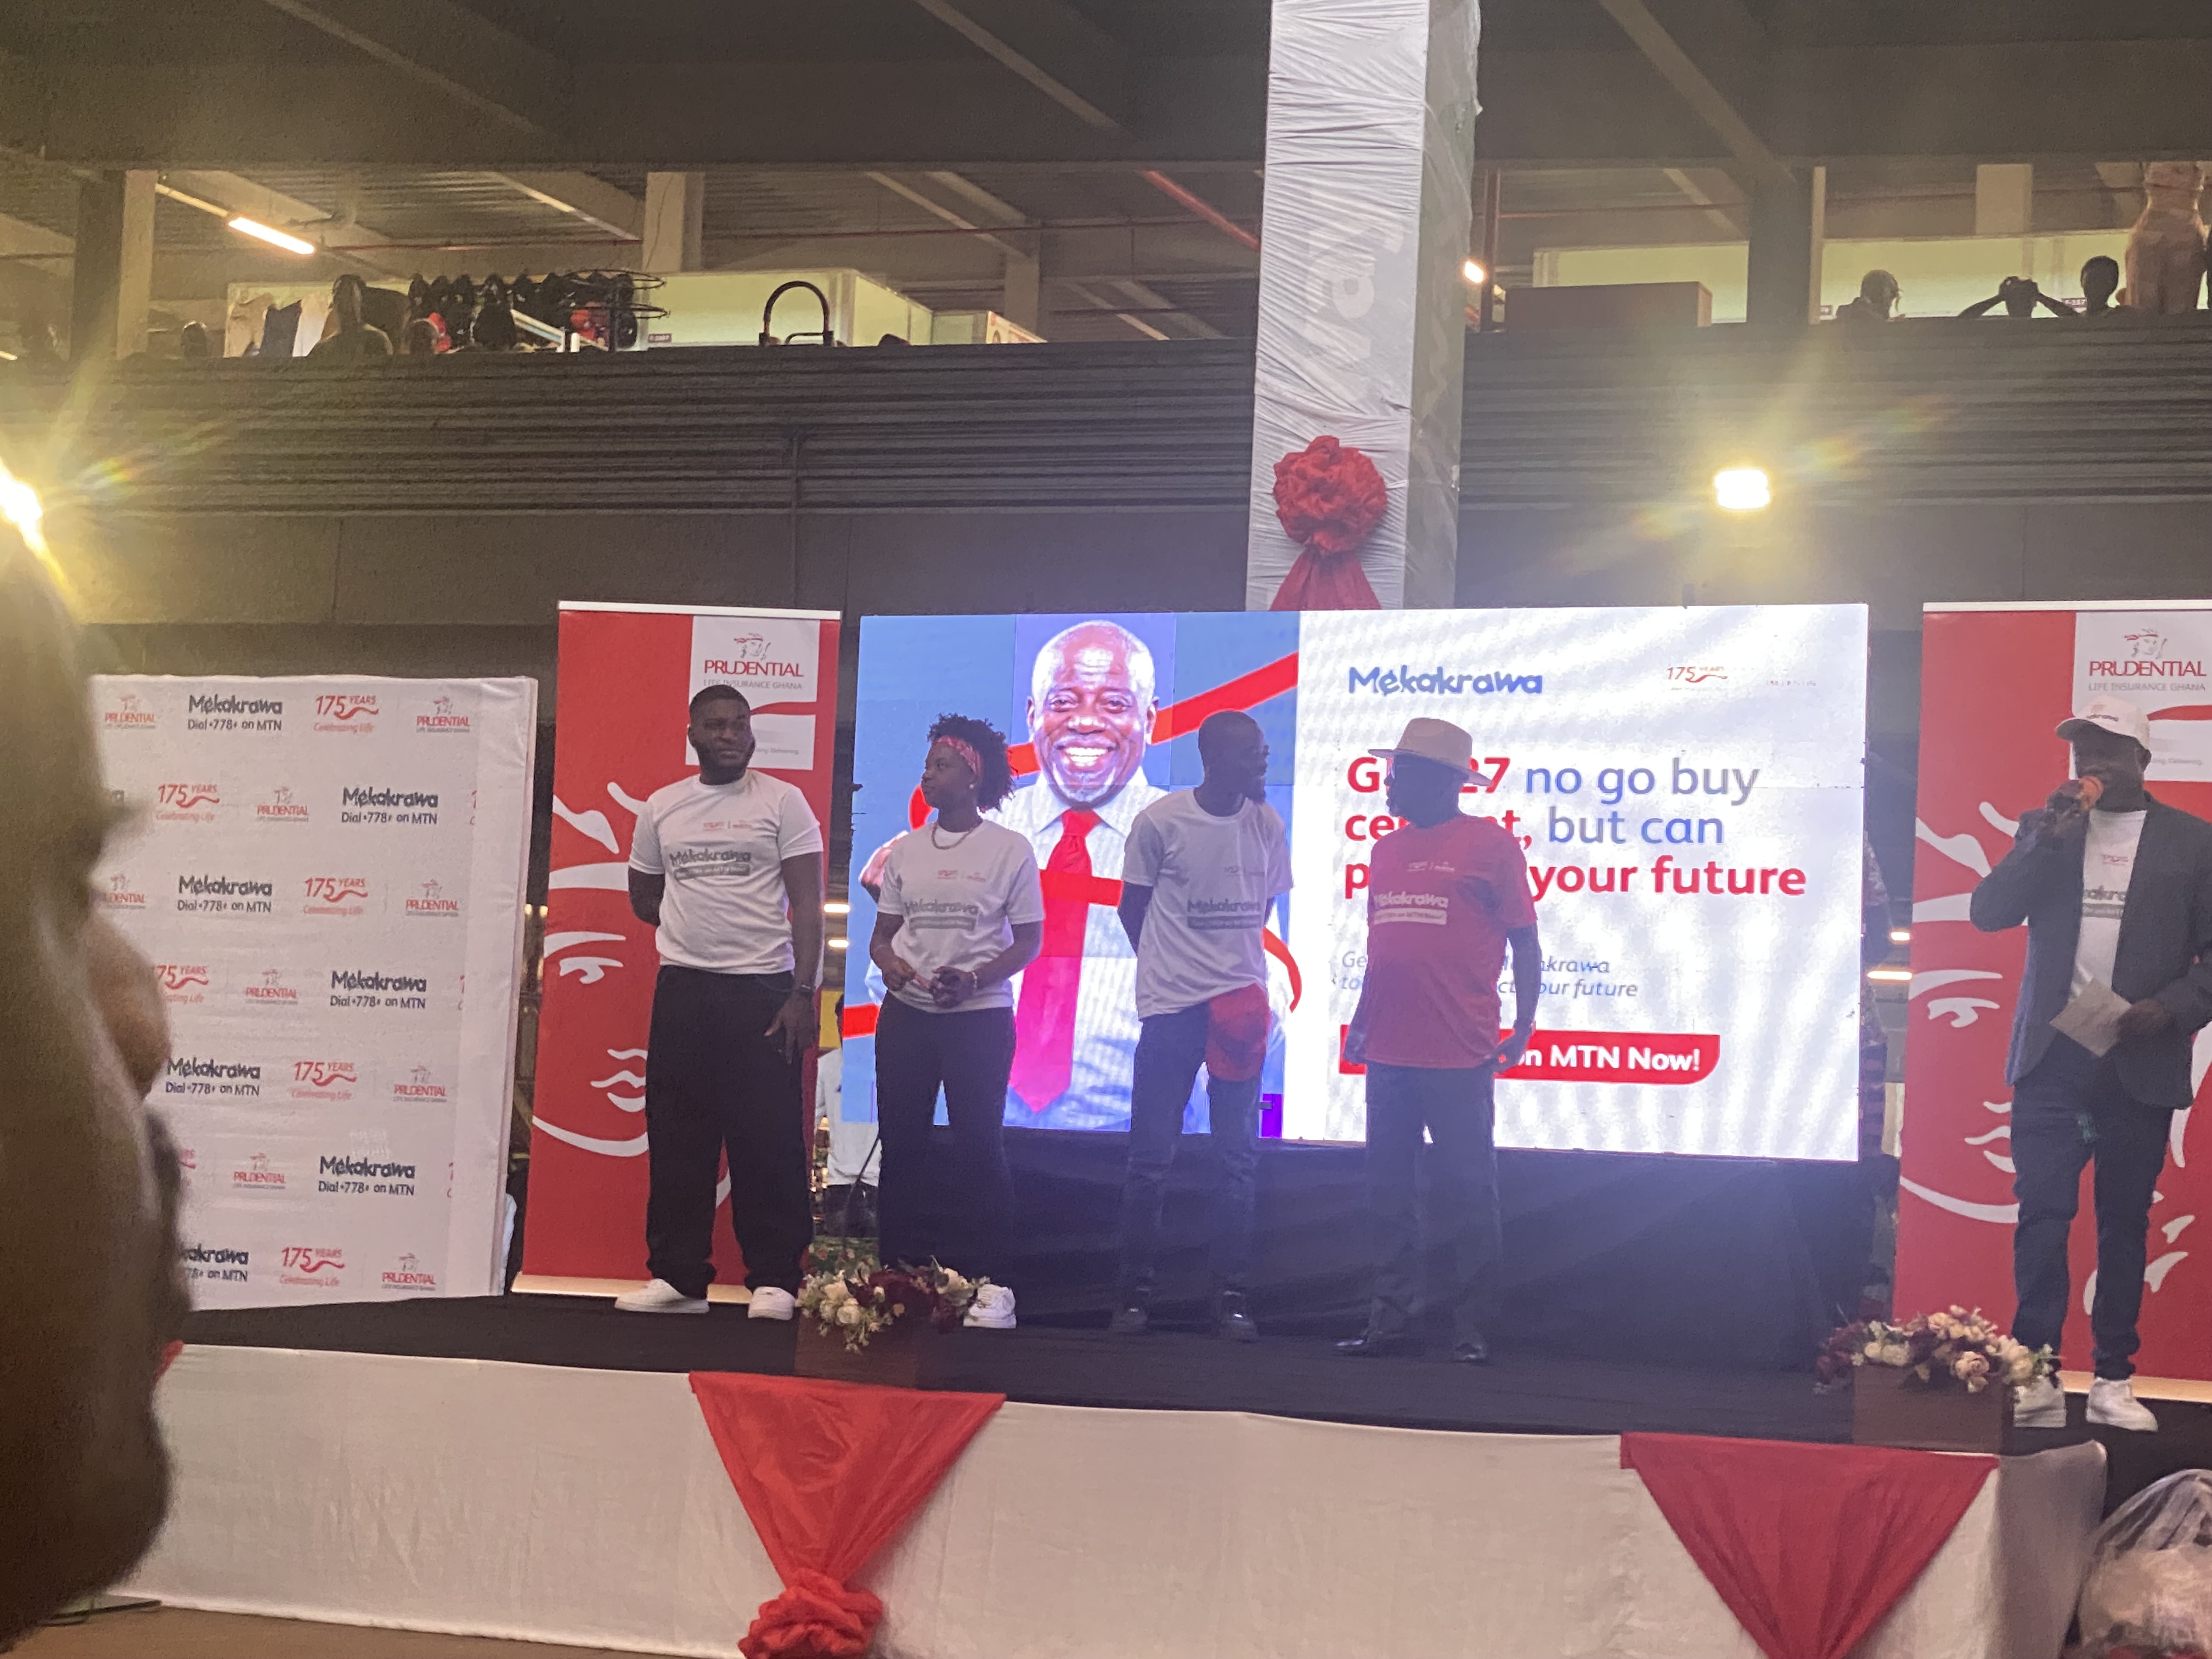 Fred Amugi, Lil Win unveiled as ambassadors of Prudential’s Mekakrawa insurance policy